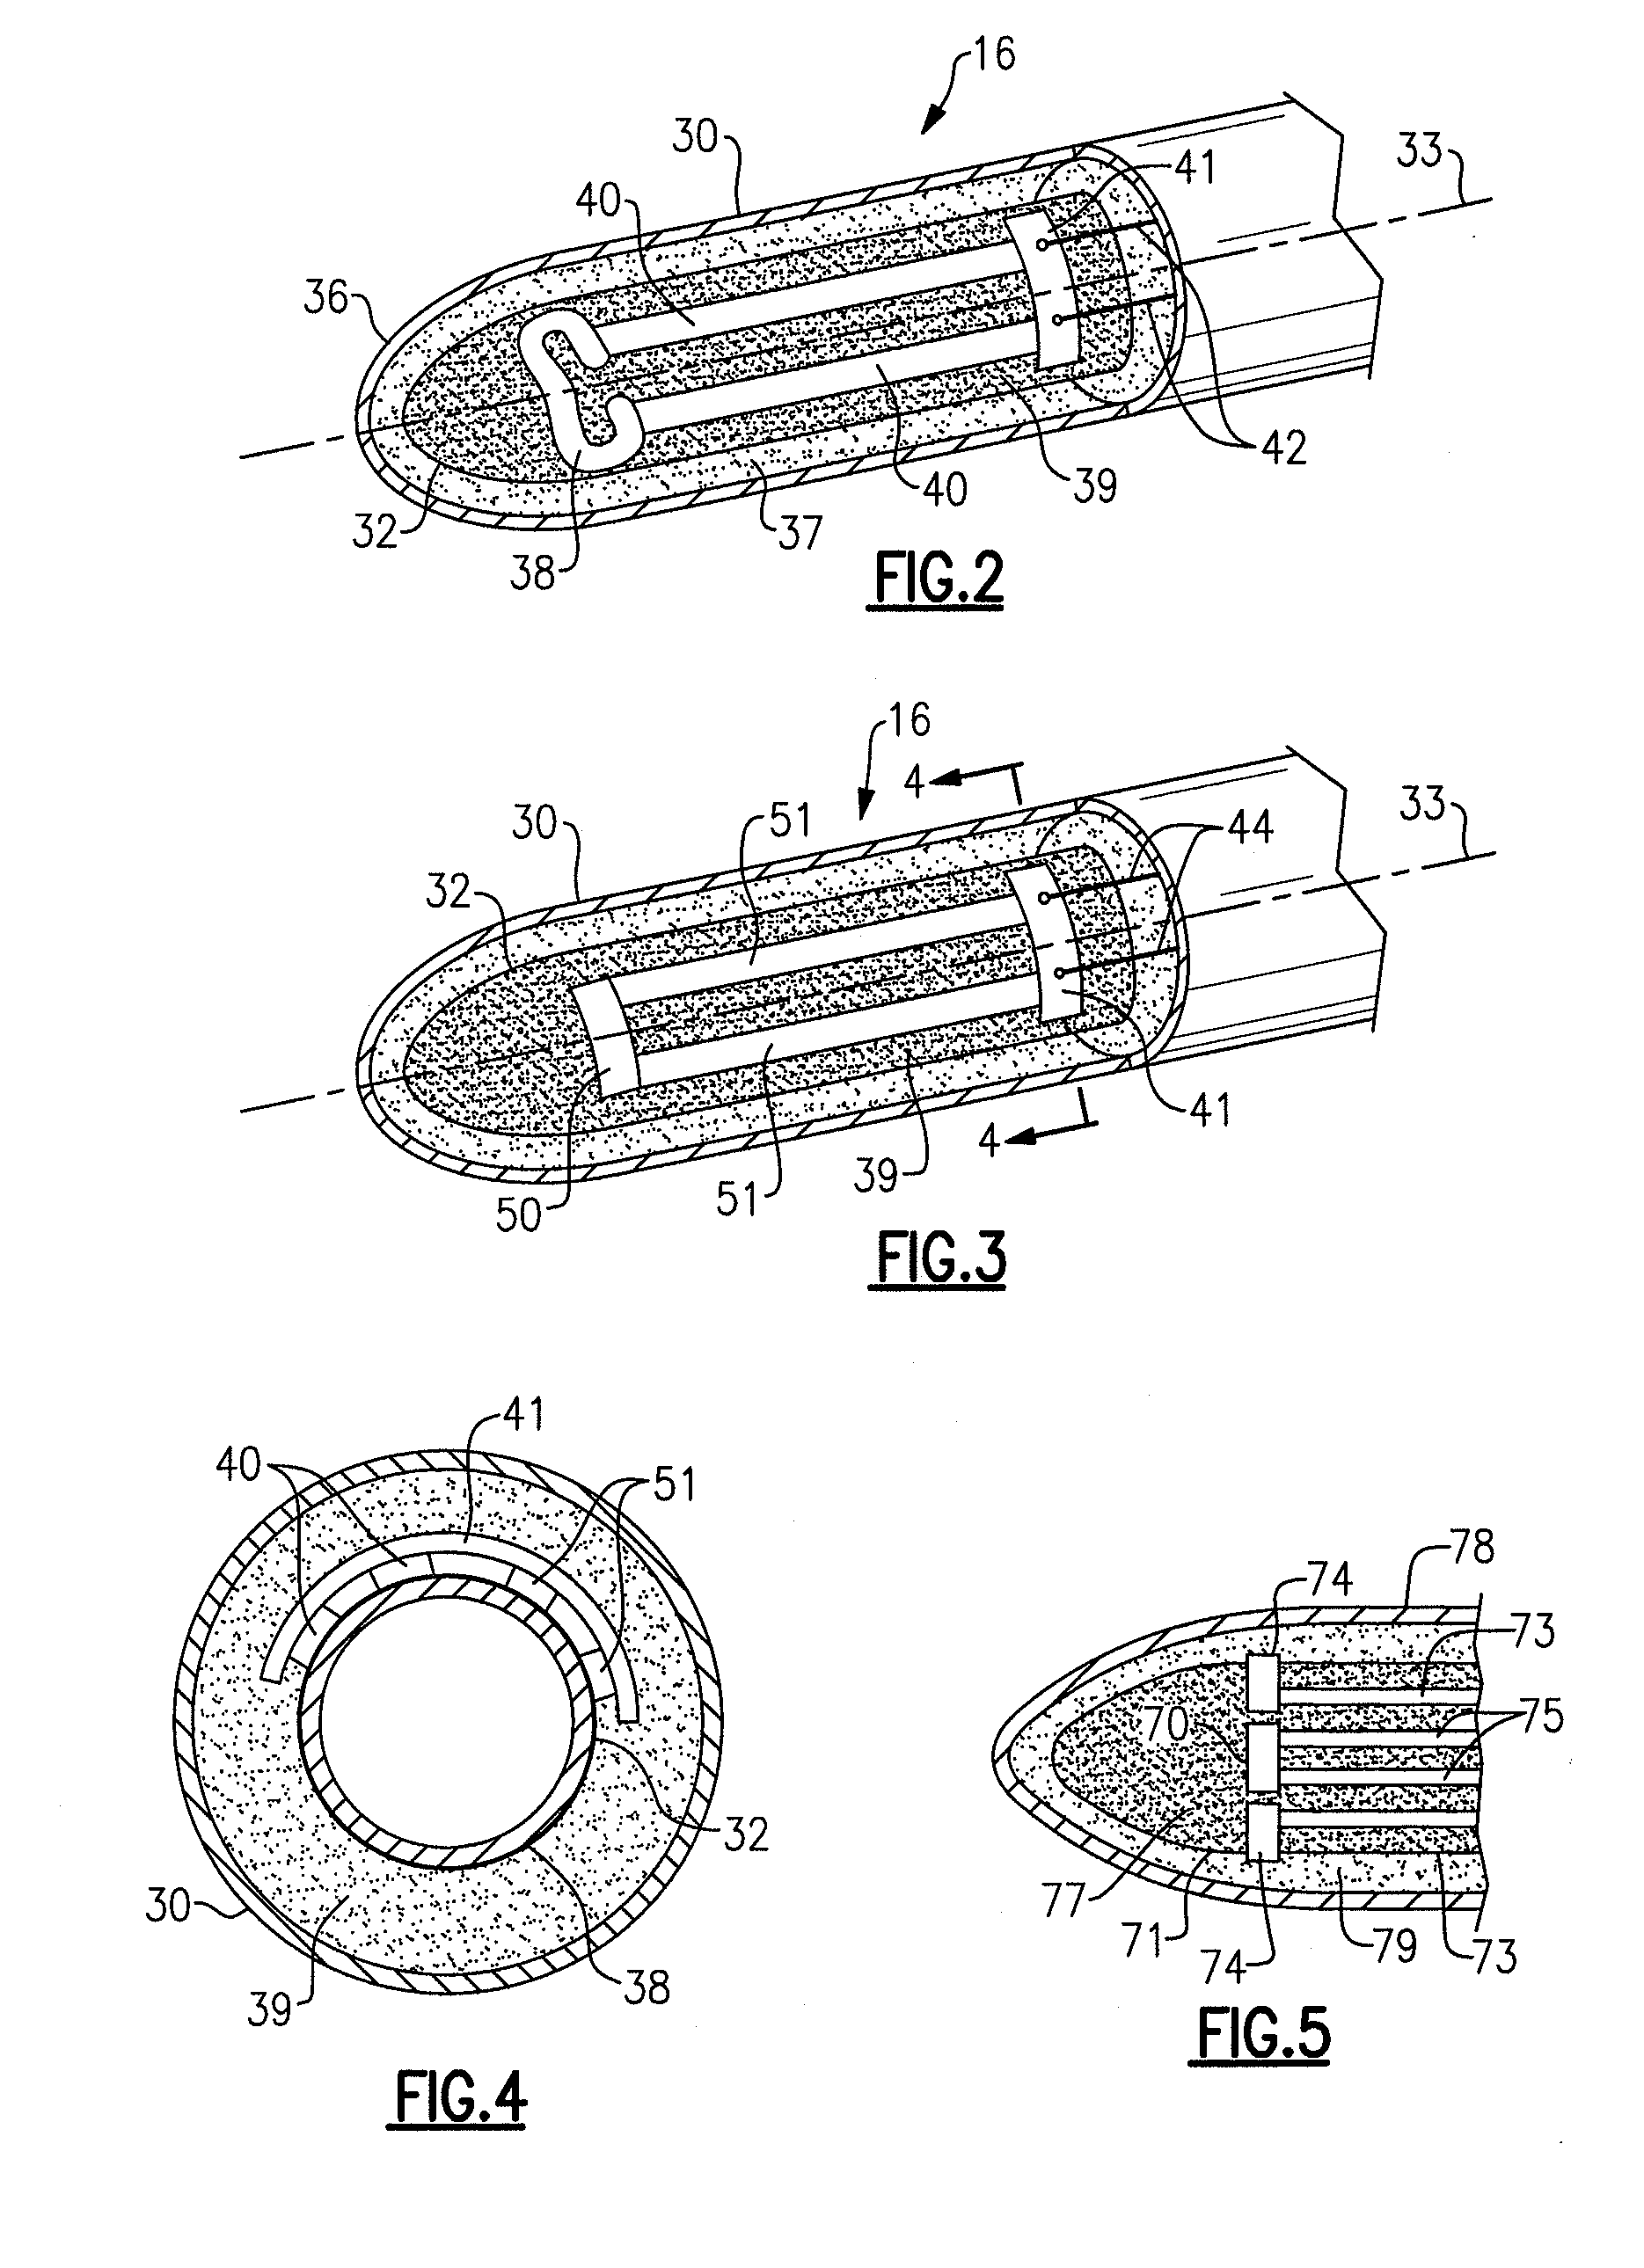 Thermometer heater and thermistor